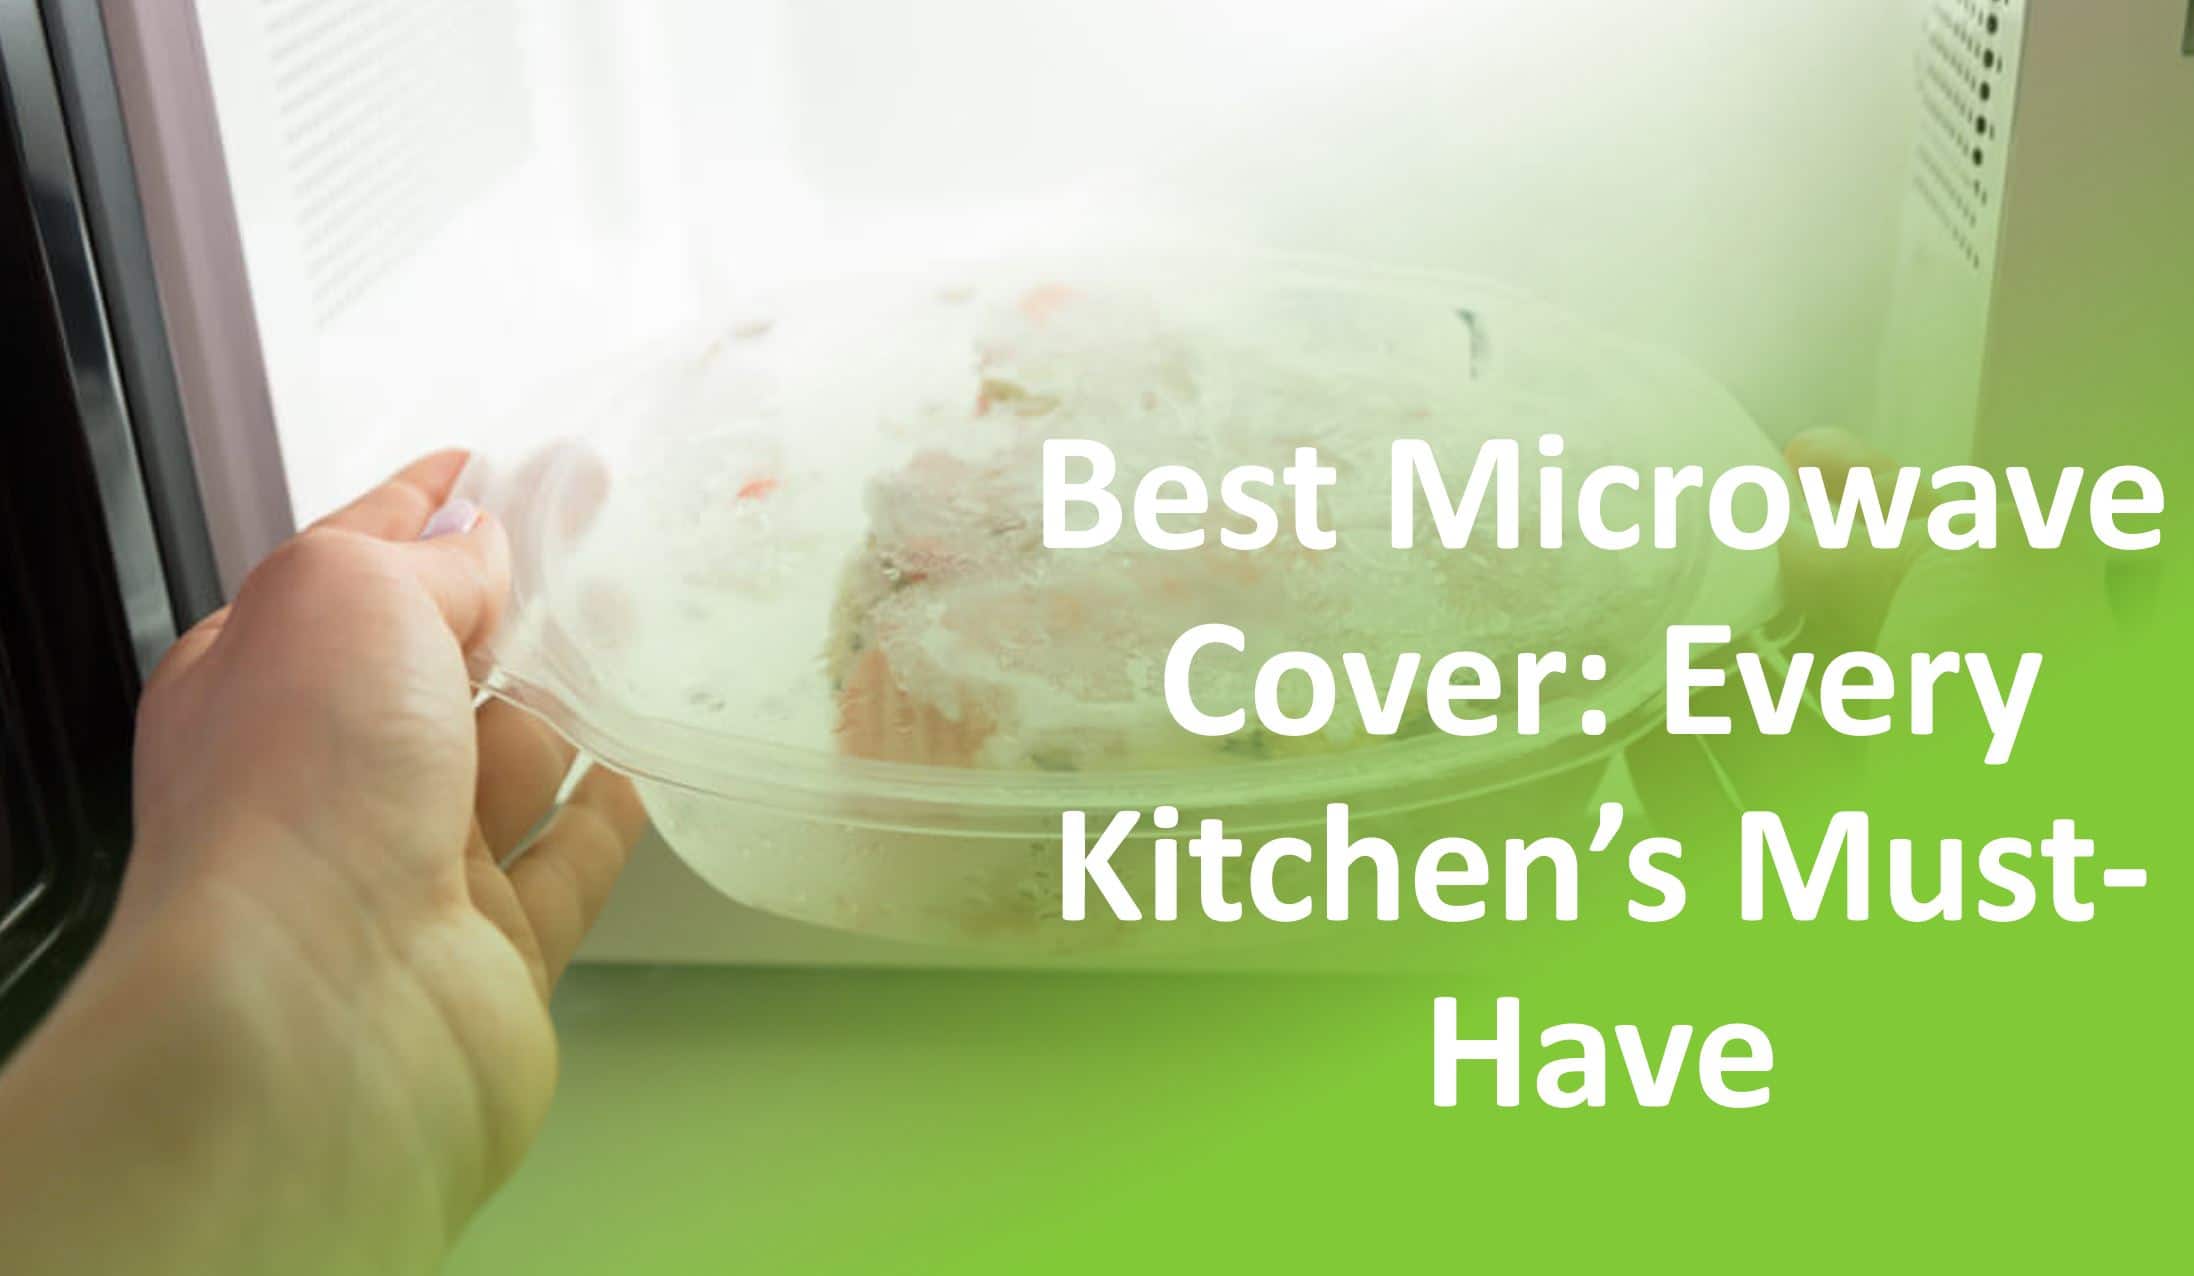 Microwave Splatter Cover for Food - The Best Microwave Food Covers by  @FoodManiac - Listium